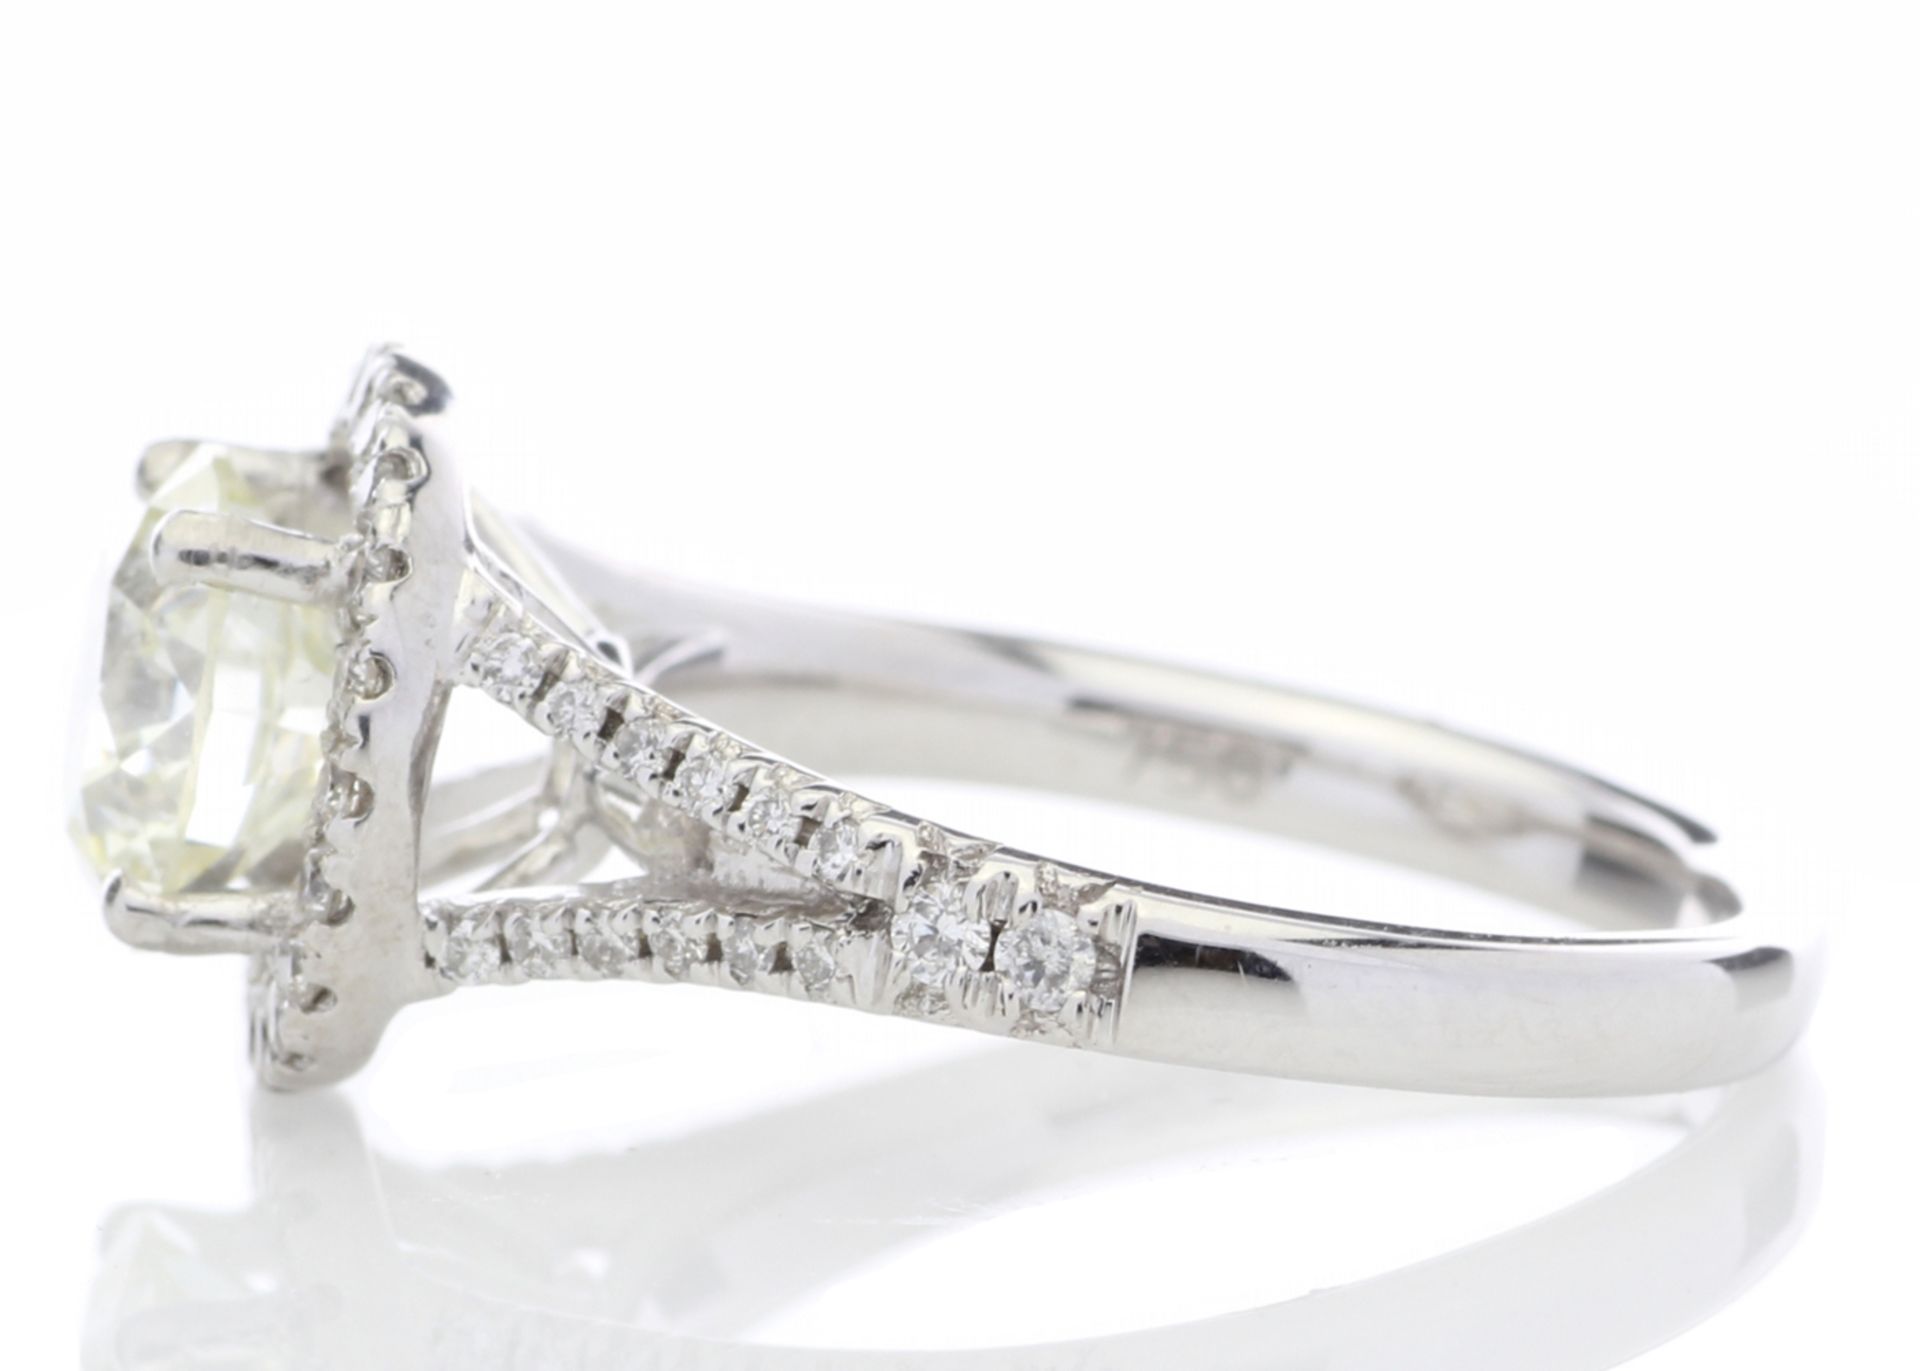 18ct White Gold Single Stone With Halo Setting Ring (1.64) 1.98 Carats - Valued by GIE £80,000. - Image 3 of 5